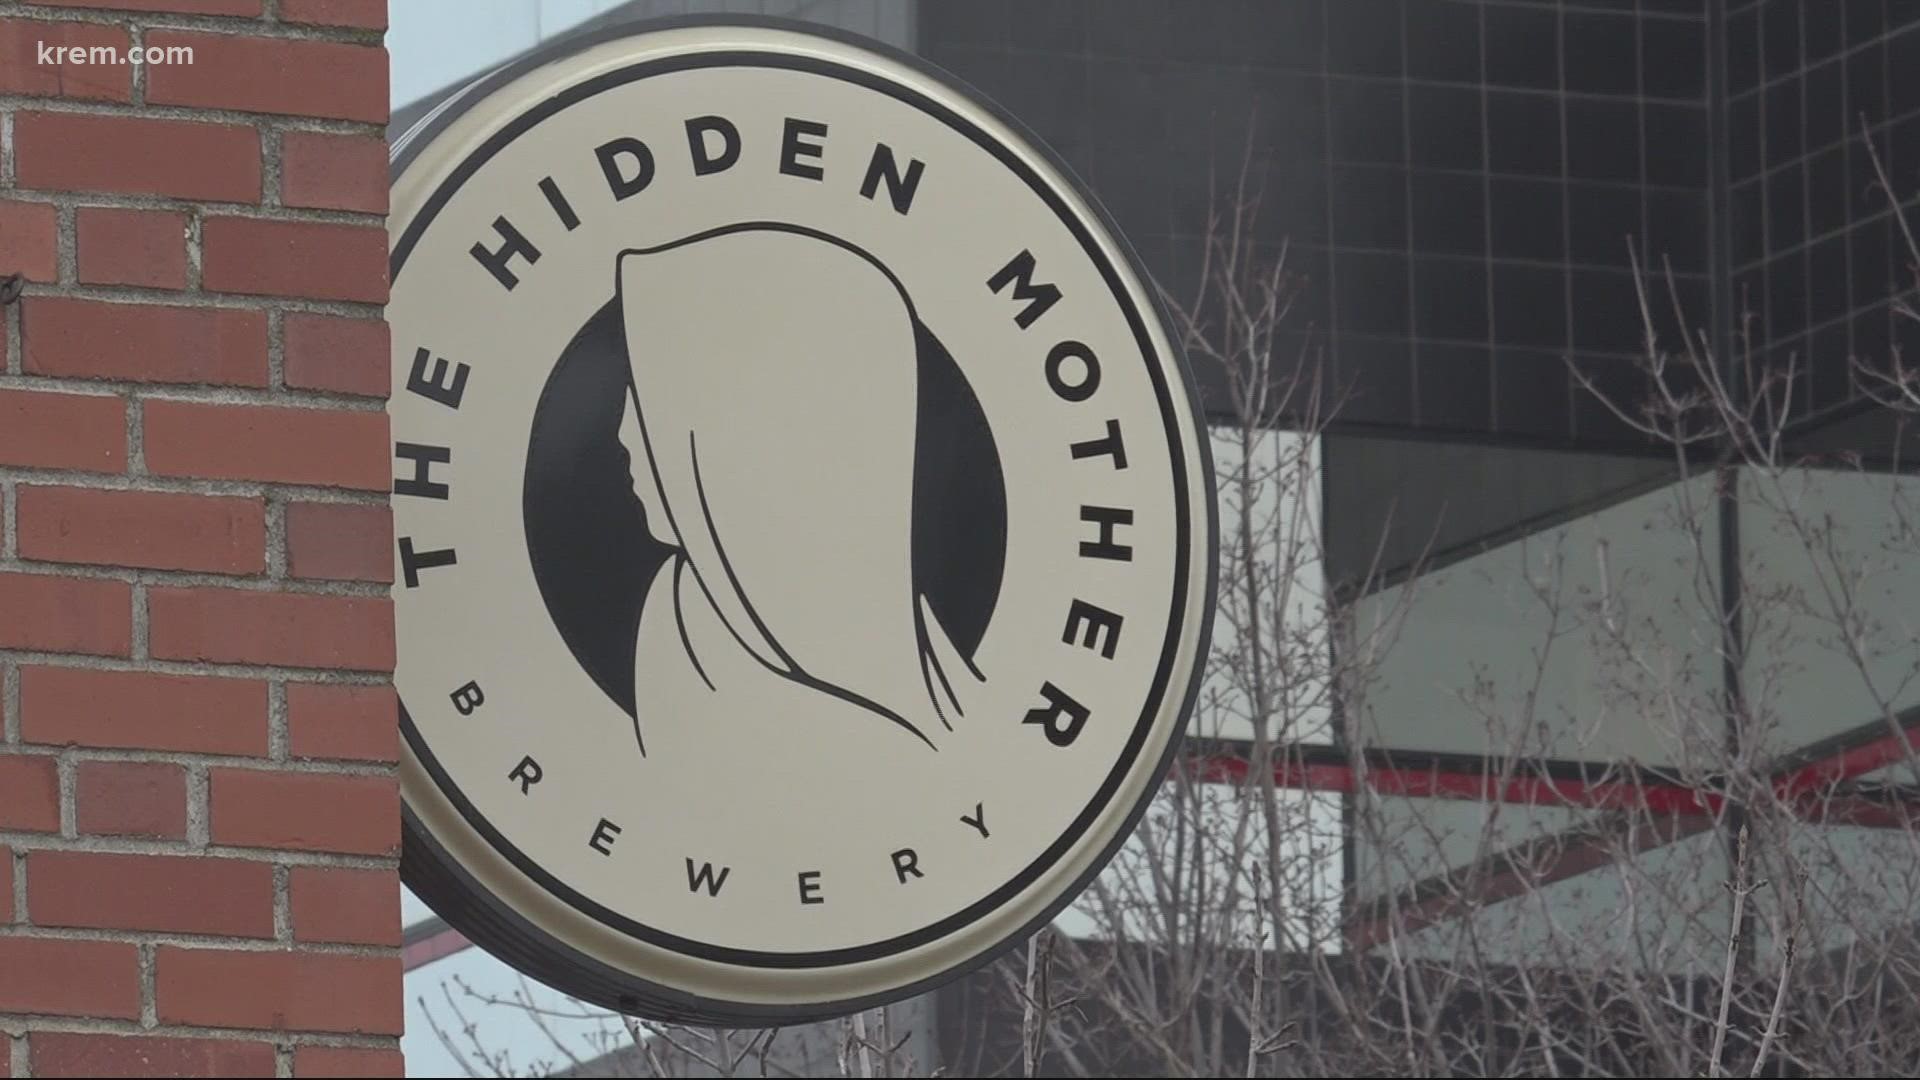 The brewery made the announcement on Instagram. KREM spoke with the owner that said the closing is due to pandemic-related regulations.